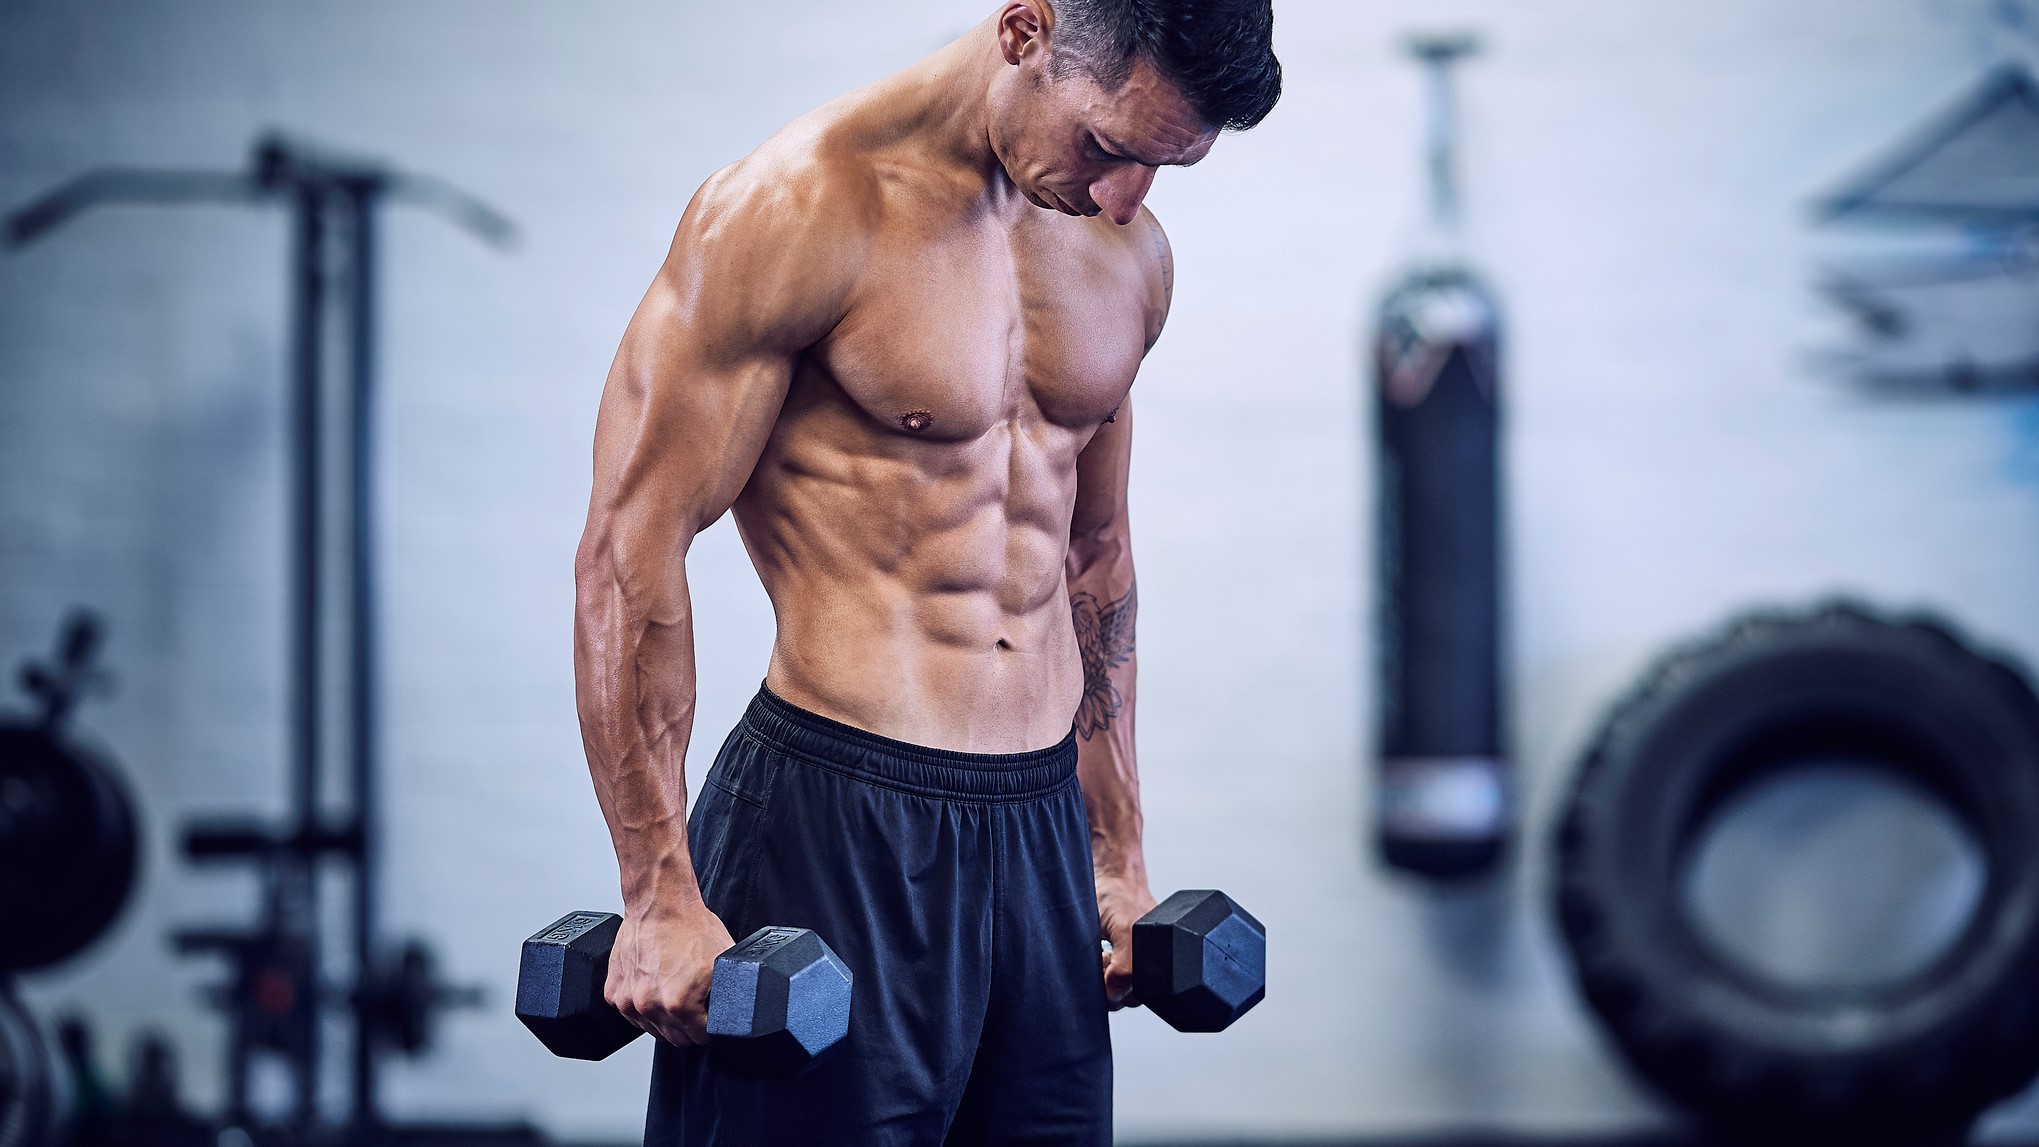 You only need these core 5 dumbbell exercises to develop muscle mass ...